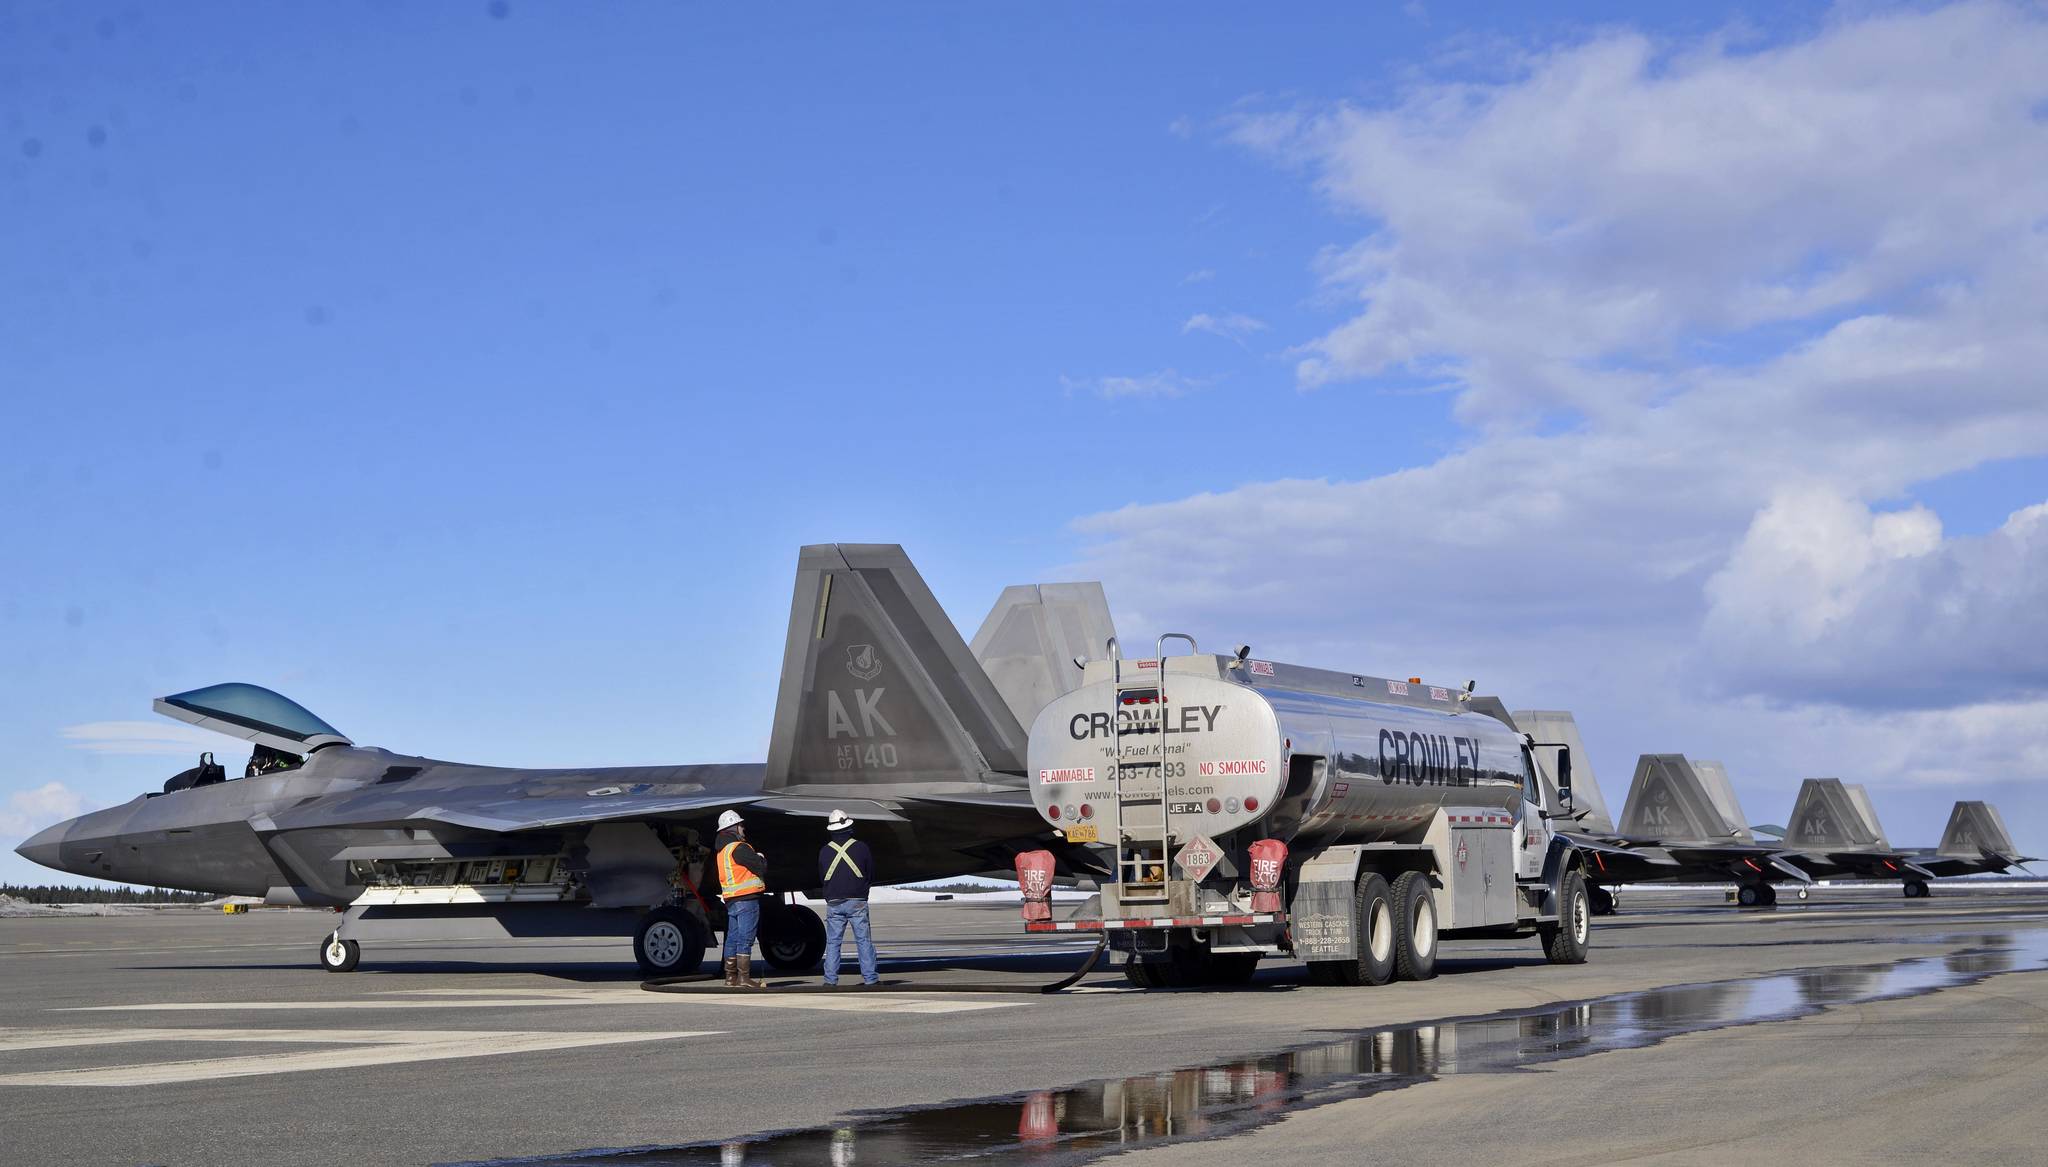 A Crowley tanker truck fuels the eight U.S. Air Force F-22 “Raptor” fighter jets that landed at the Kenai Municipal Airport on Monday, March 19, 2018 in Kenai. Weather conditions stopped the fighters from landing at Joint Base Elmendorf-Richardson in Anchorage, their home field. Four of the F-22s belong to the 90th Fighter Squadron and four to the 525th Fighter Squadron, which were on separate training flights before landing in Kenai, said Major Stephen Montgomery, a pilot with the 90th. The fighters took off for Anchorage Monday afternoon. F-22s from Elmendorf have been occasionally using Kenai as an alternate landing site since October 2016, when a pair of the fighters landed there to assess the possibility. (Photo by Ben Boettger/Peninsula Clarion)